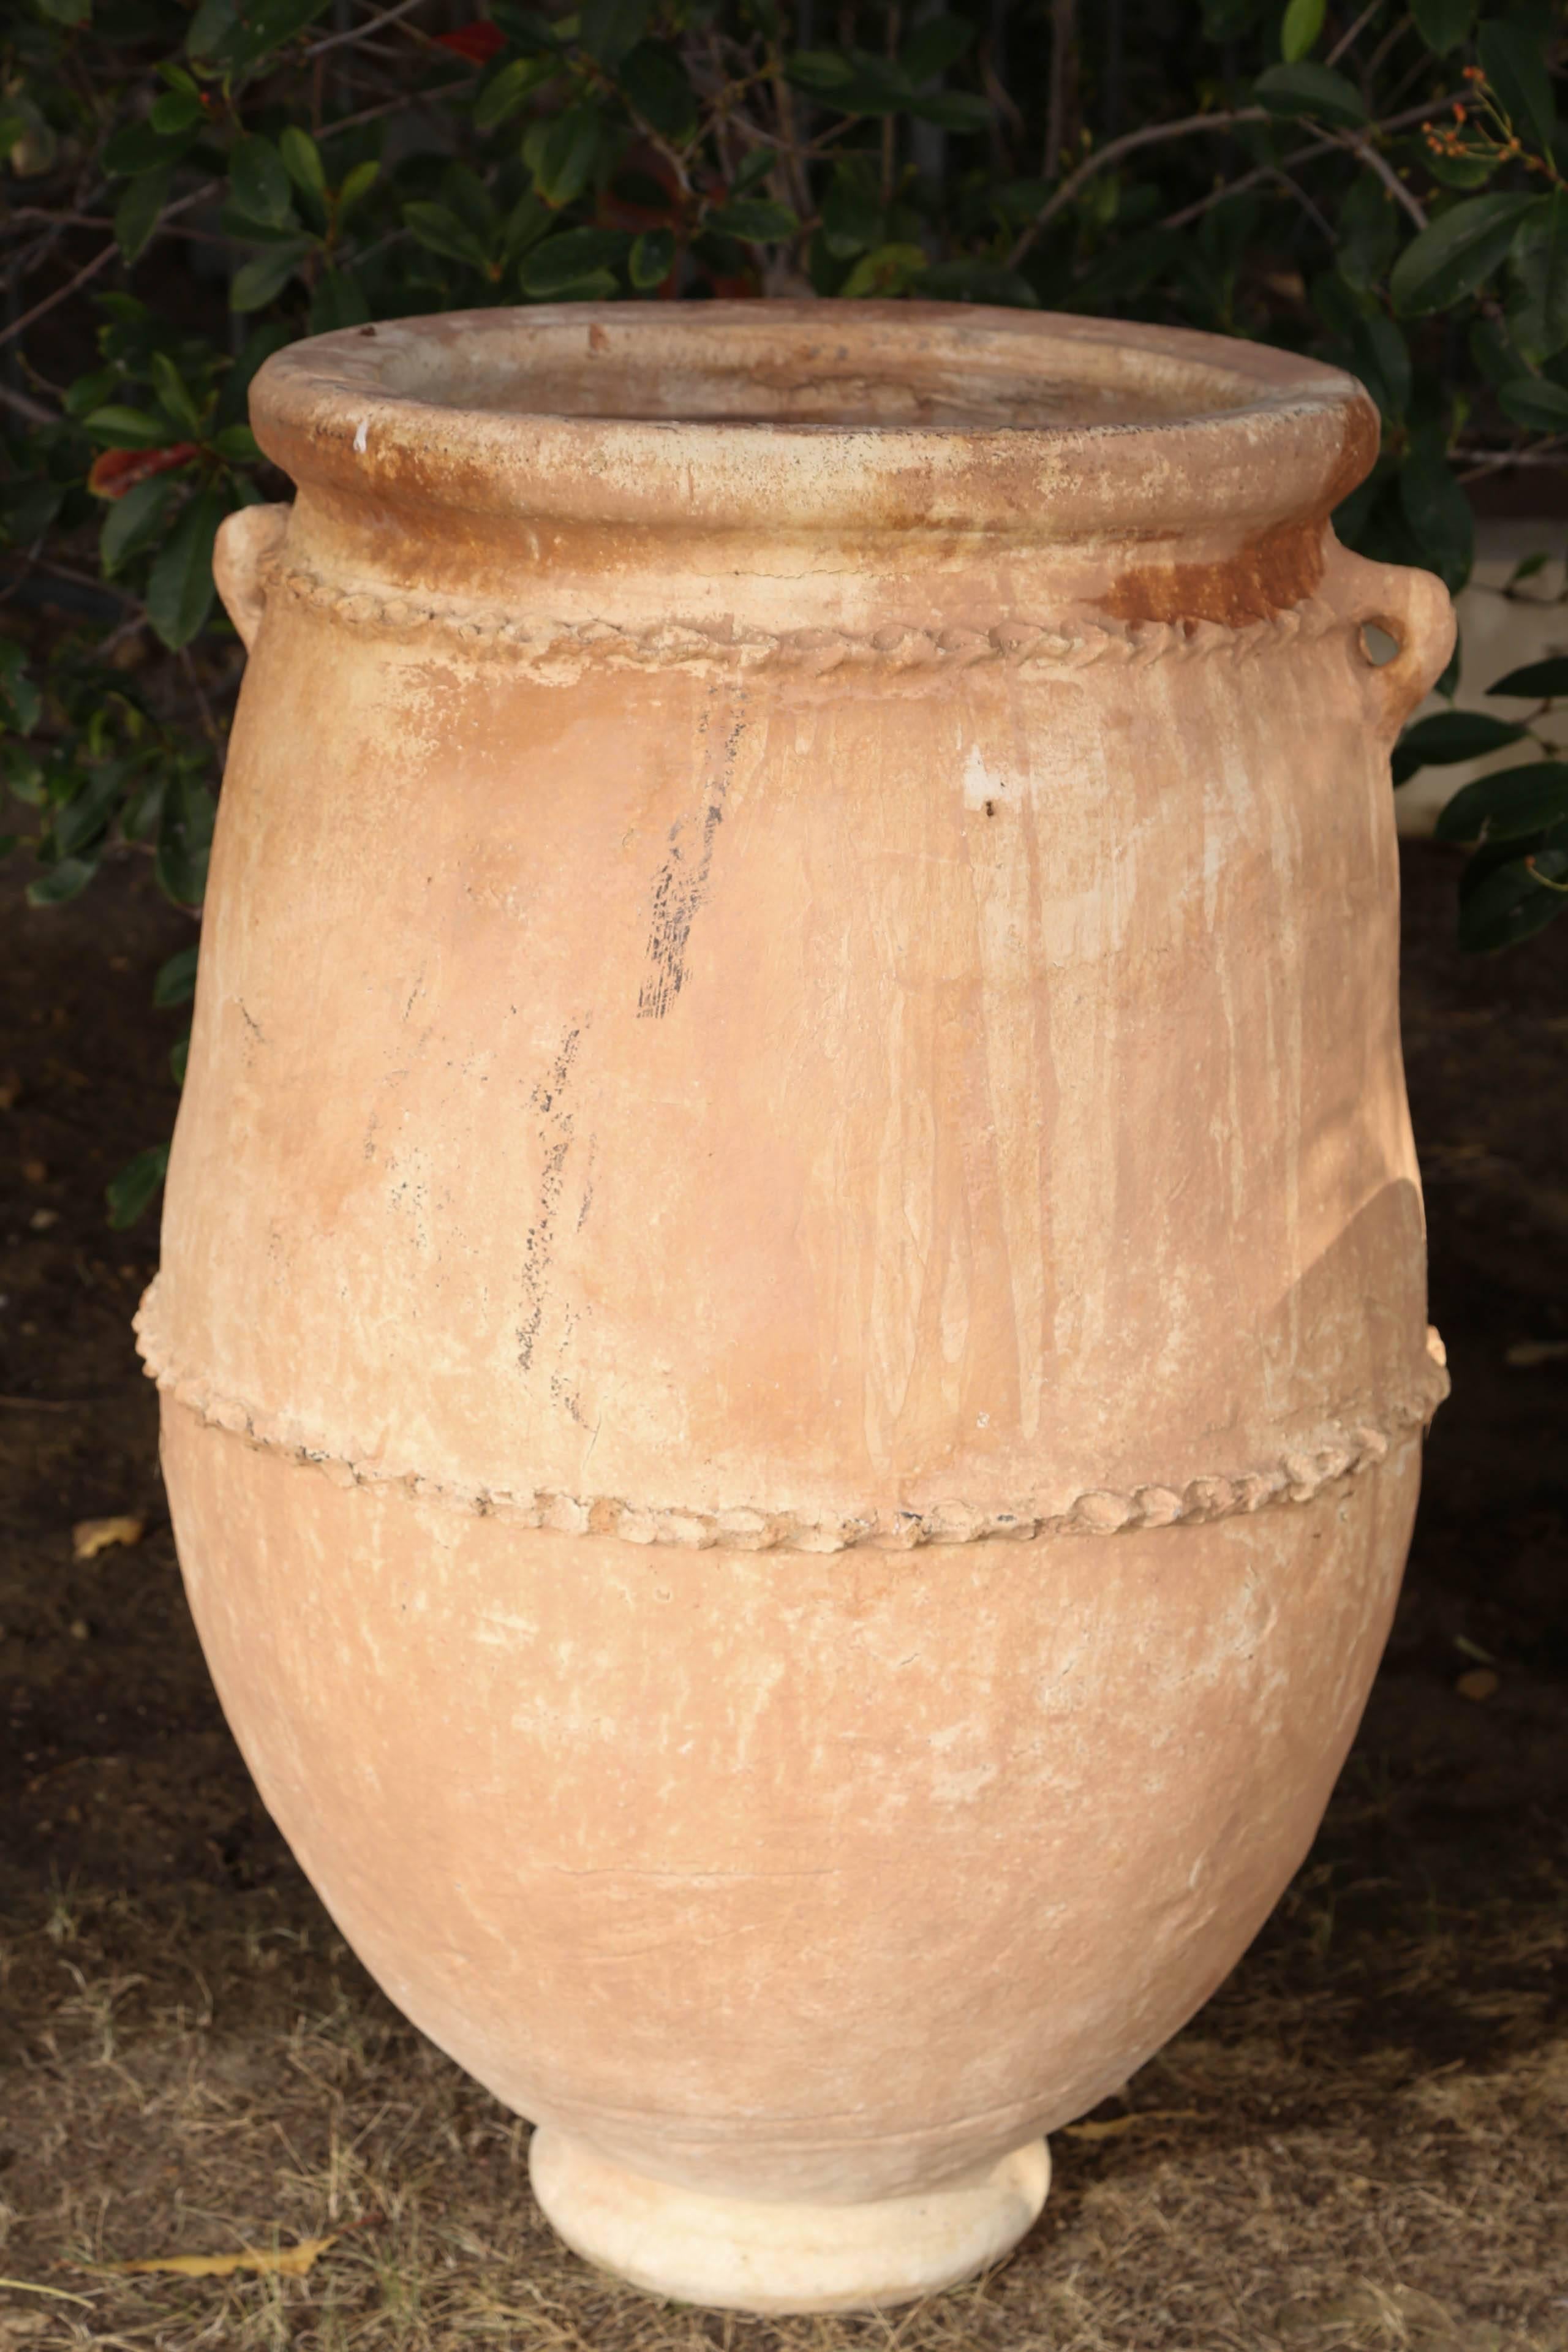 Large Moroccan  terra-cotta garden planters.
Hand-made in Morocco. Large oversized olive oil jar urn cylindrical body garden ornament, could be used indoor or outdoor nice for citrus trees.
Great architectural look, nice addition to any